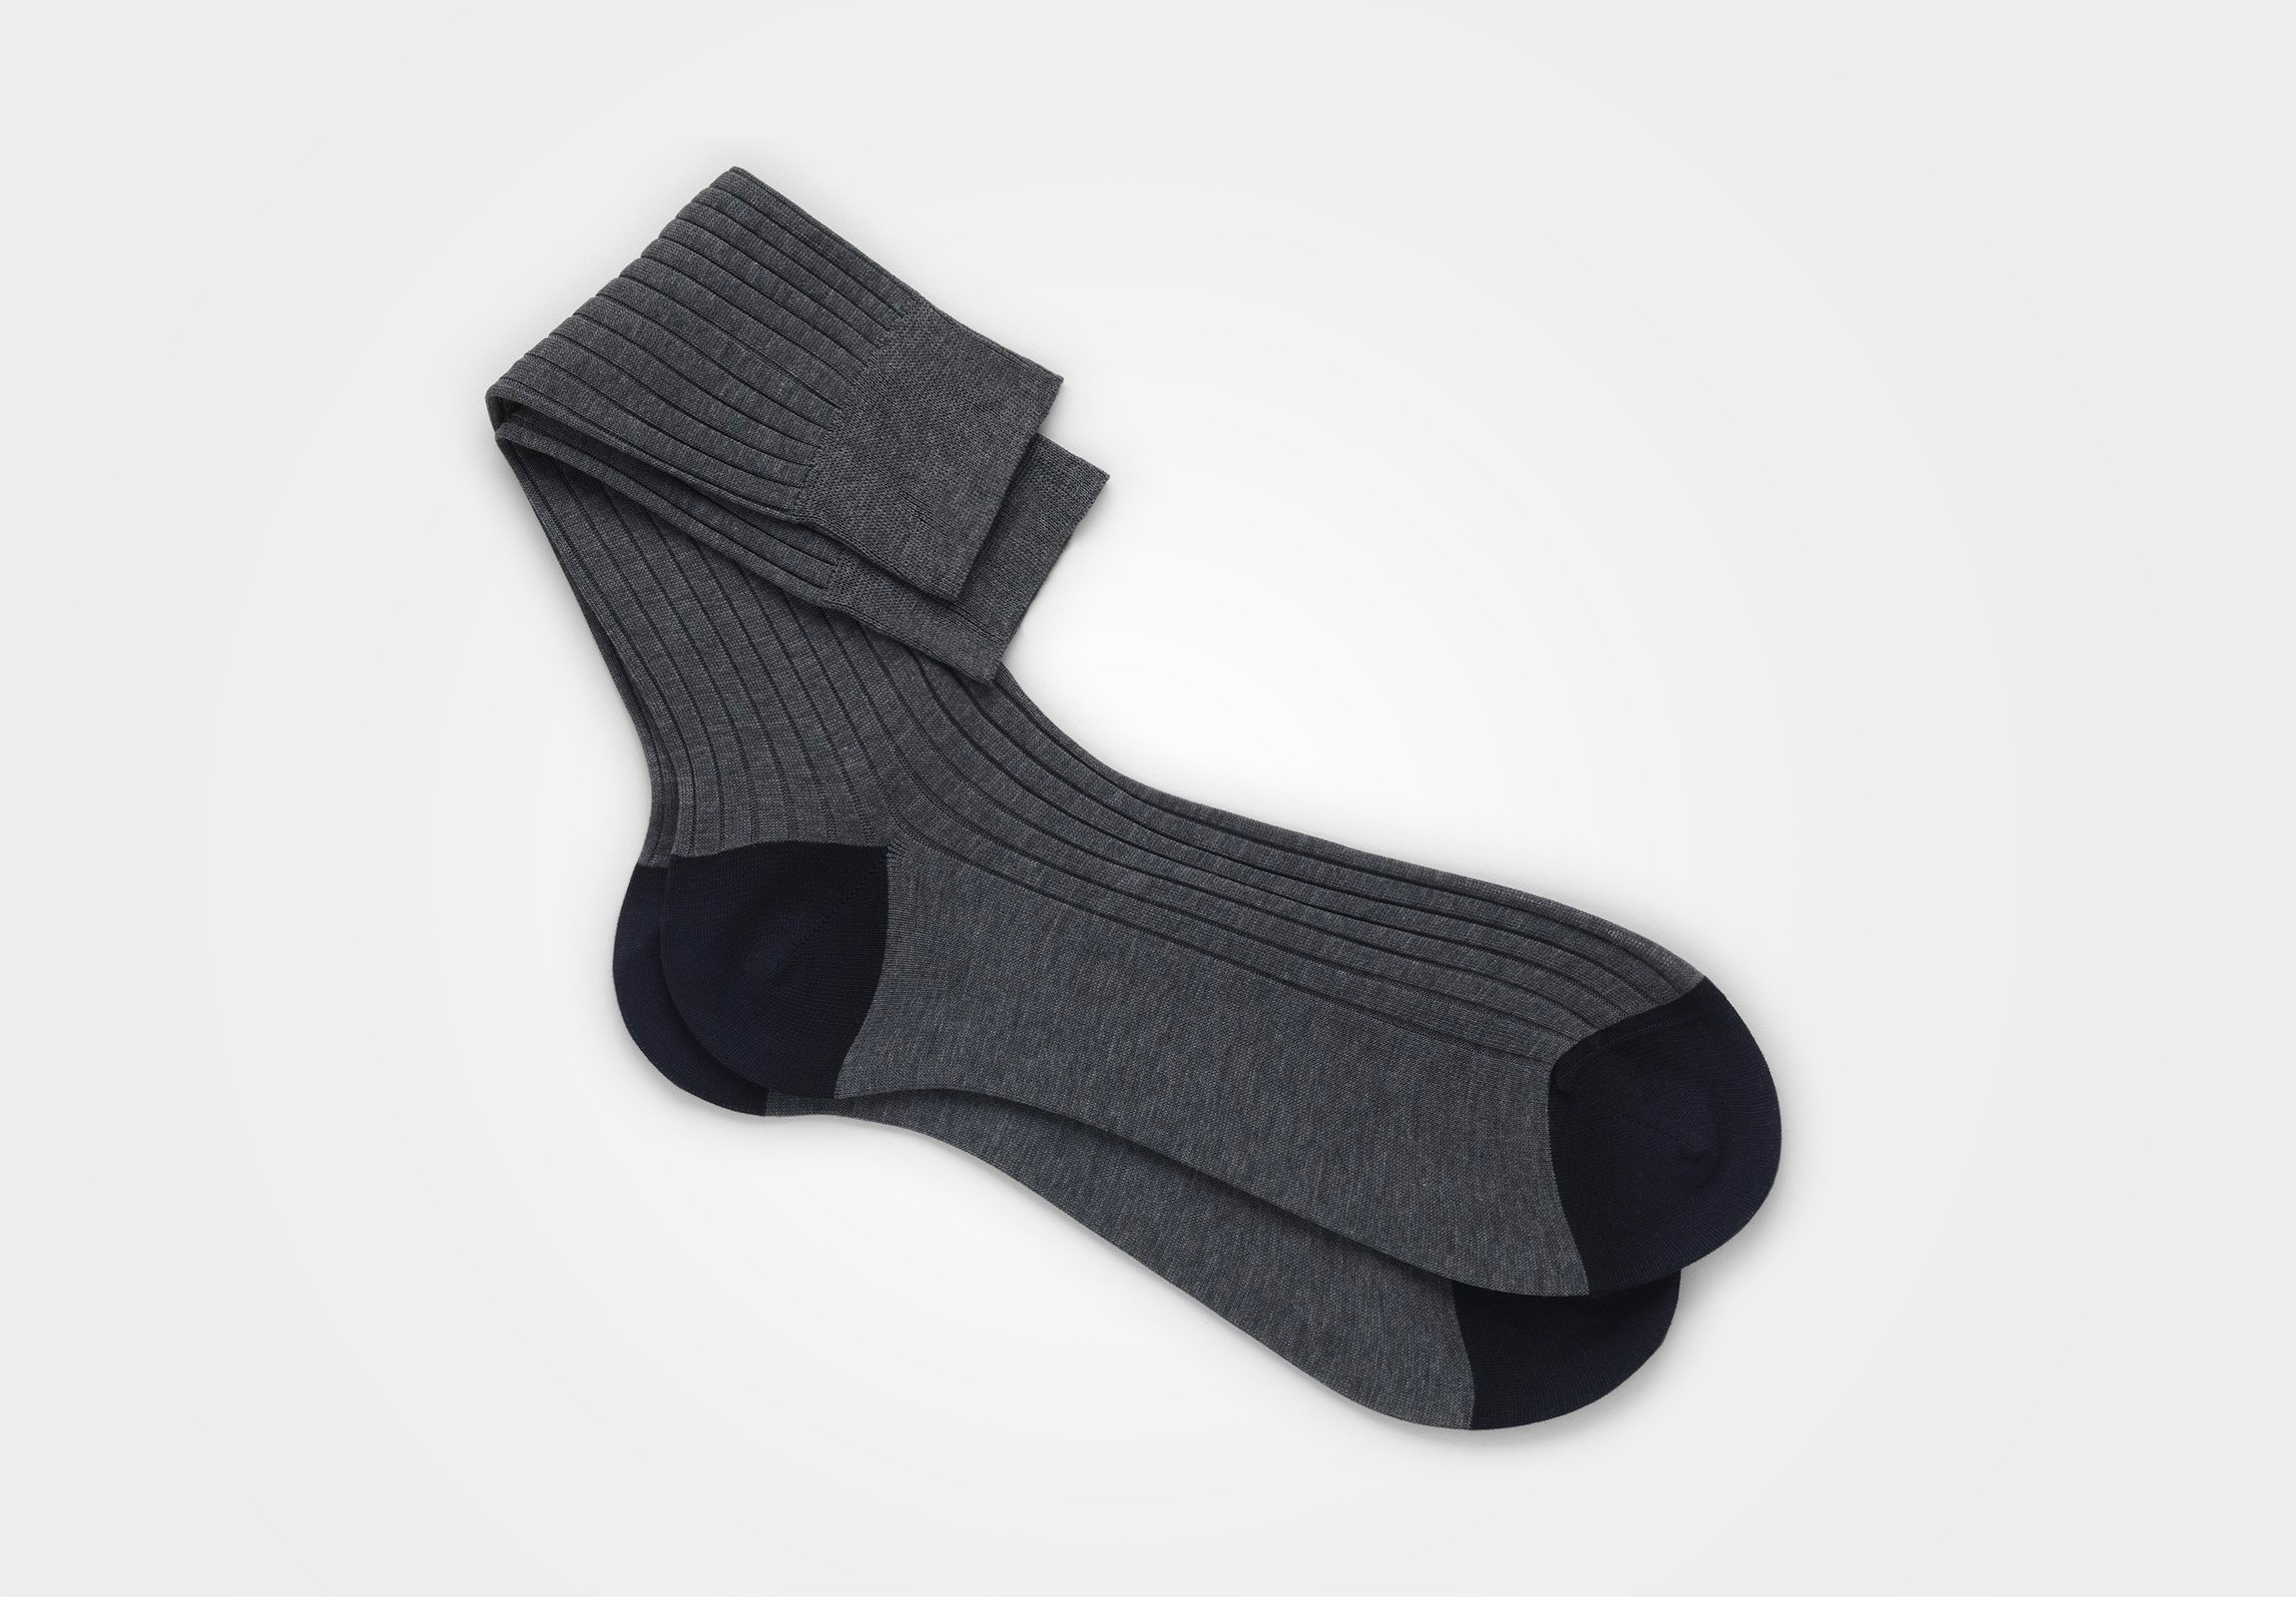 socks with colored heel and toe